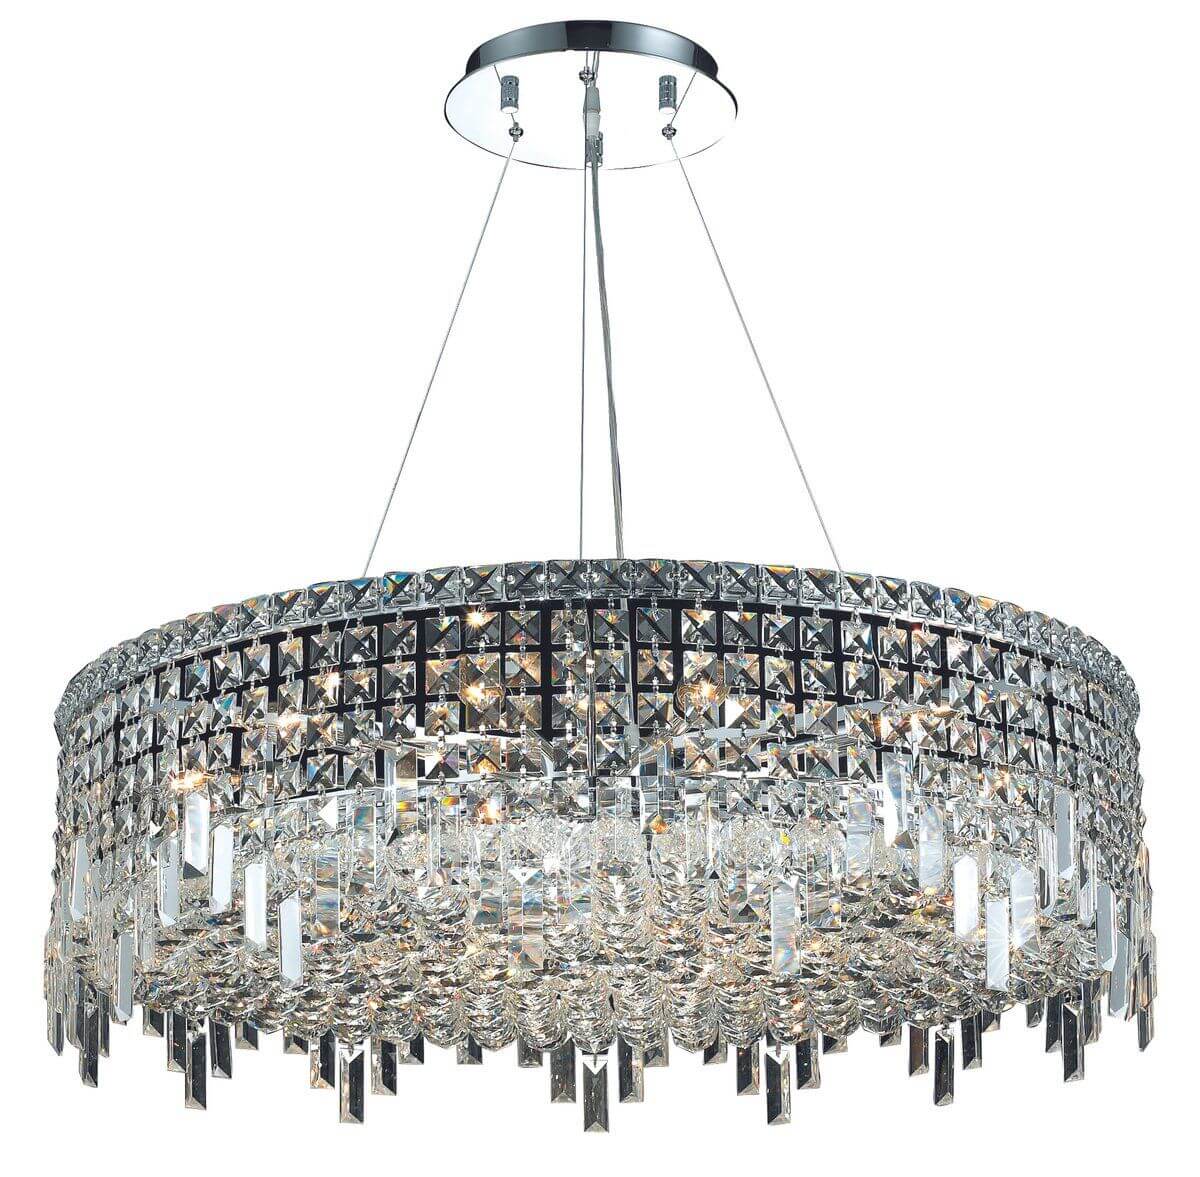 Elegant Lighting Maxime 18 Light 32 Inch Crystal Chandelier In Chrome With Royal Cut Clear Crystal V2031D32C/RC